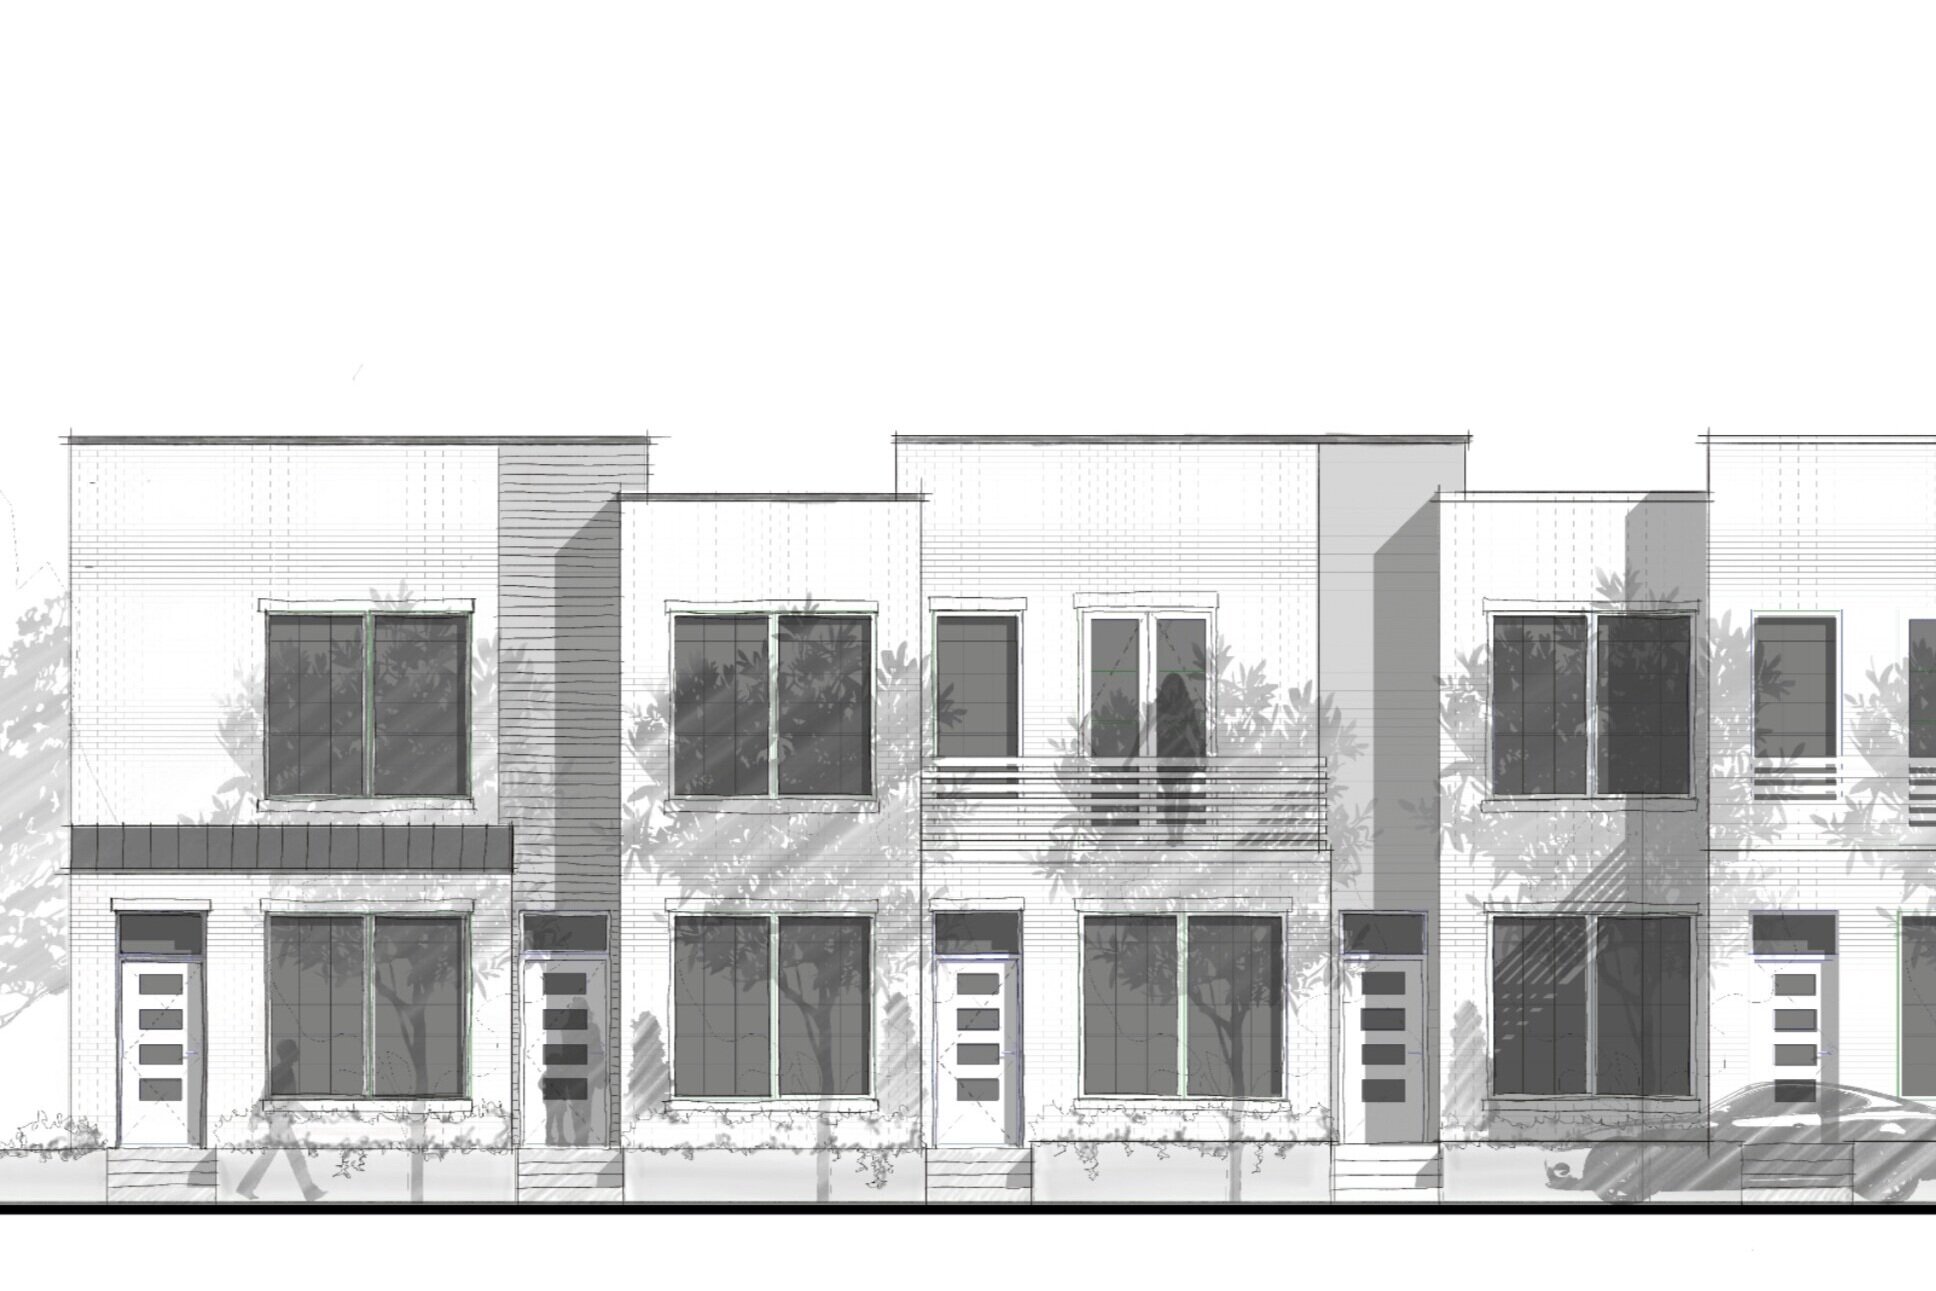 Townhome Site Study